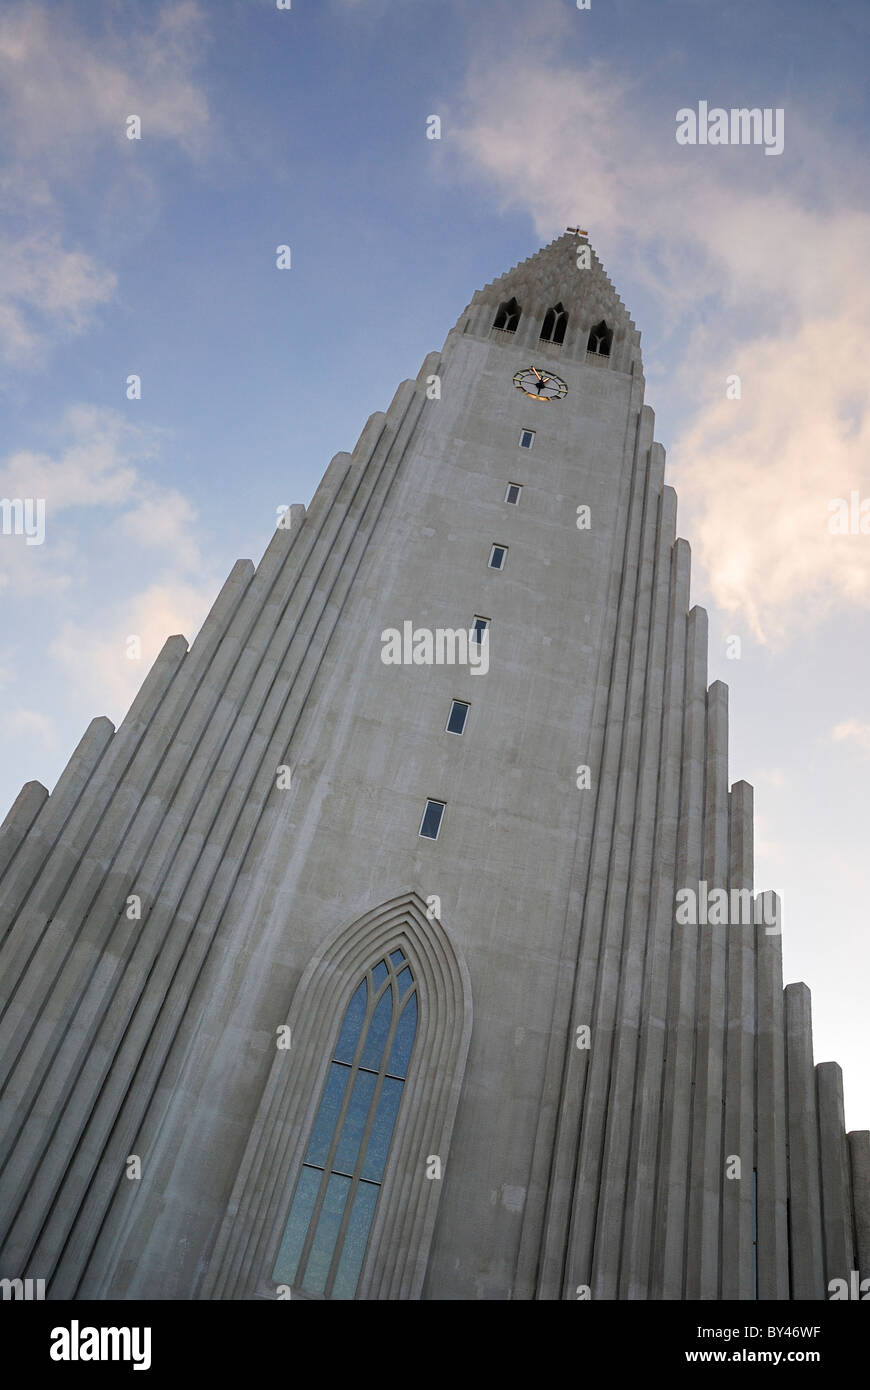 The tower of the Hallgrimskirkja Cathedral in Reykjavik, Iceland Stock Photo